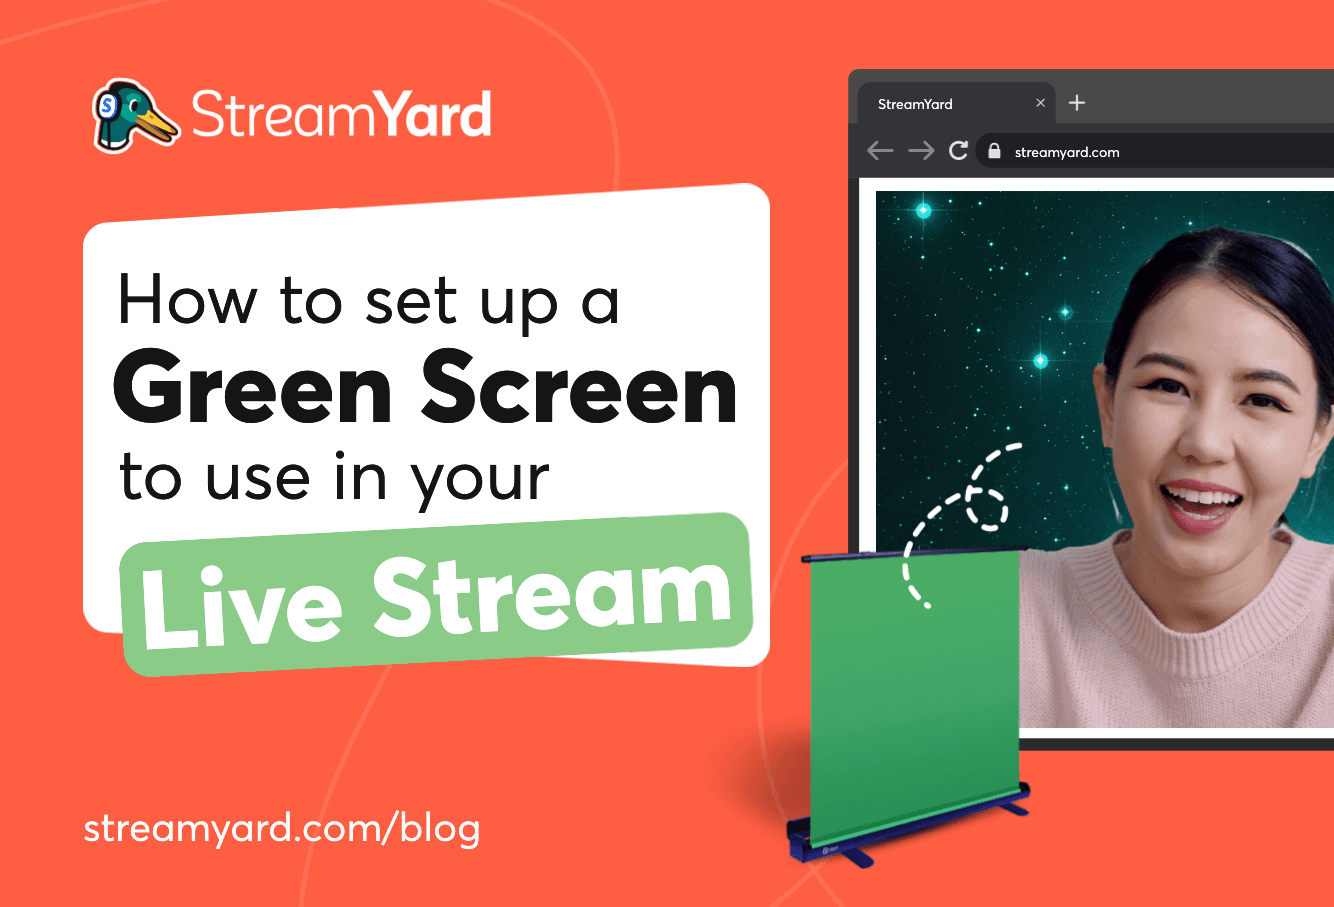 Learn how to quickly set up a green screen to use when live streaming with this easy to follow, step-by-step guide.